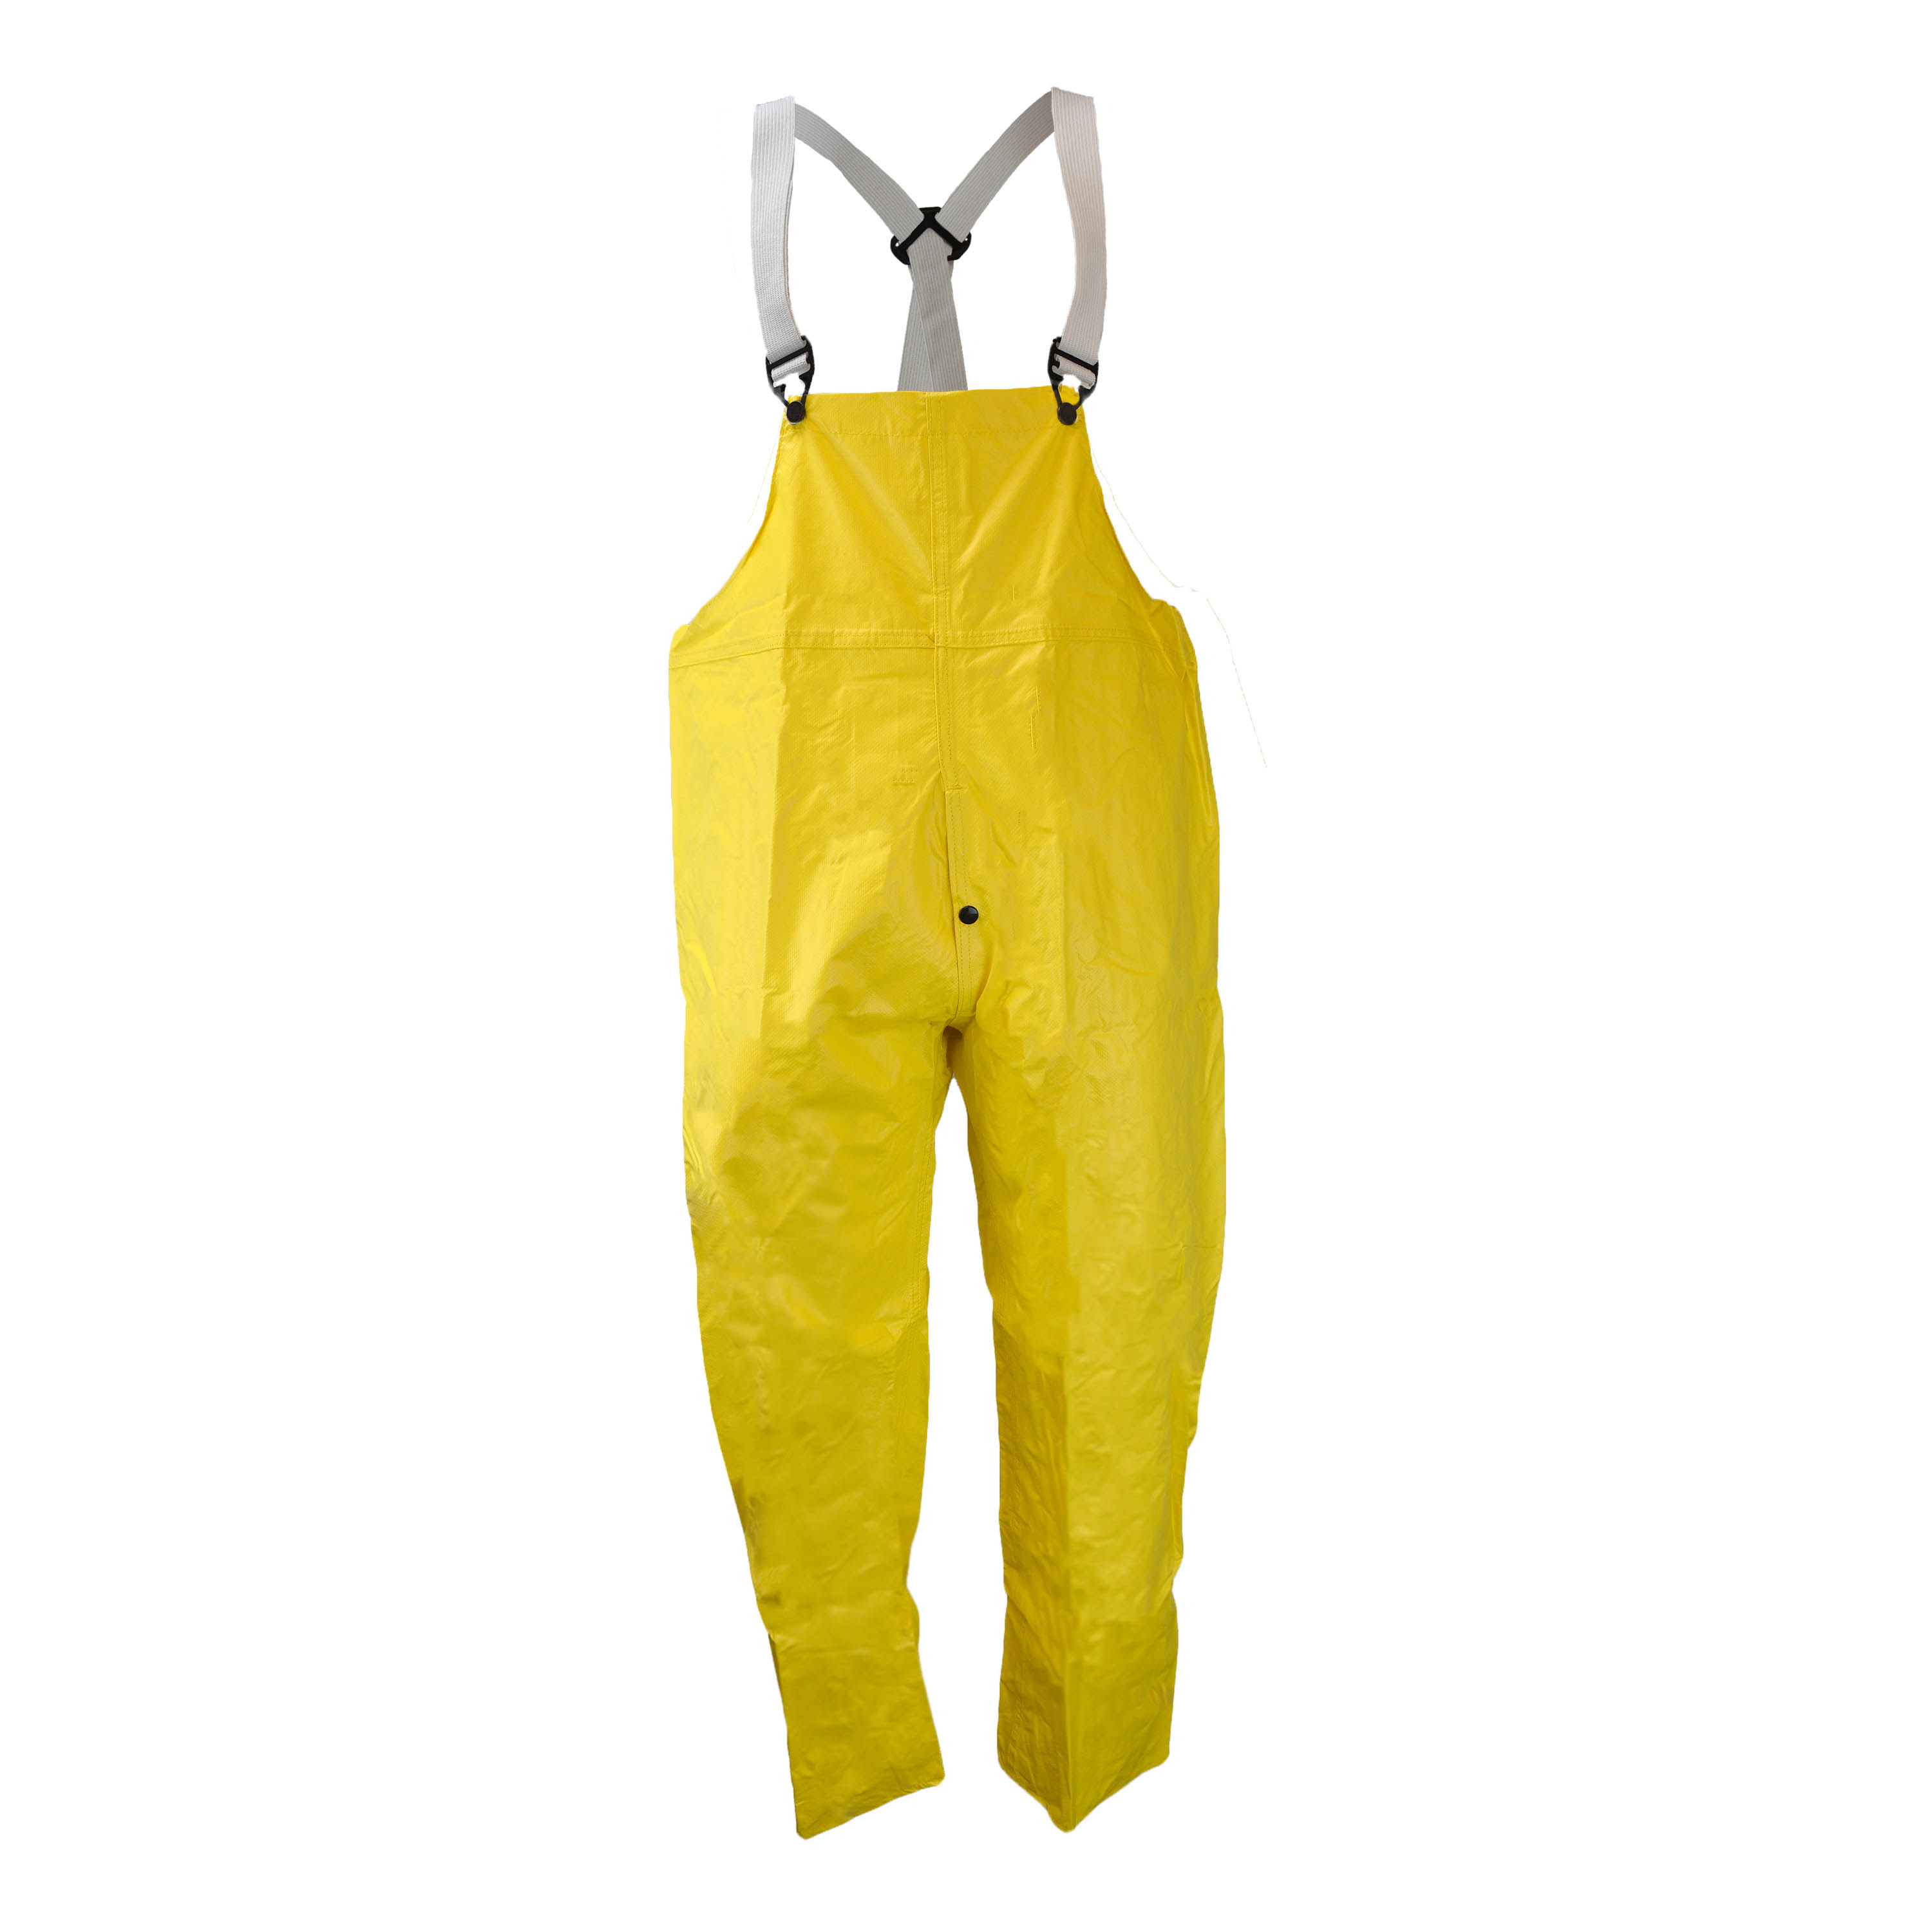 Universal 35 Bib Trouser with Fly - Safety Yellow - Size XL - Rain Suits